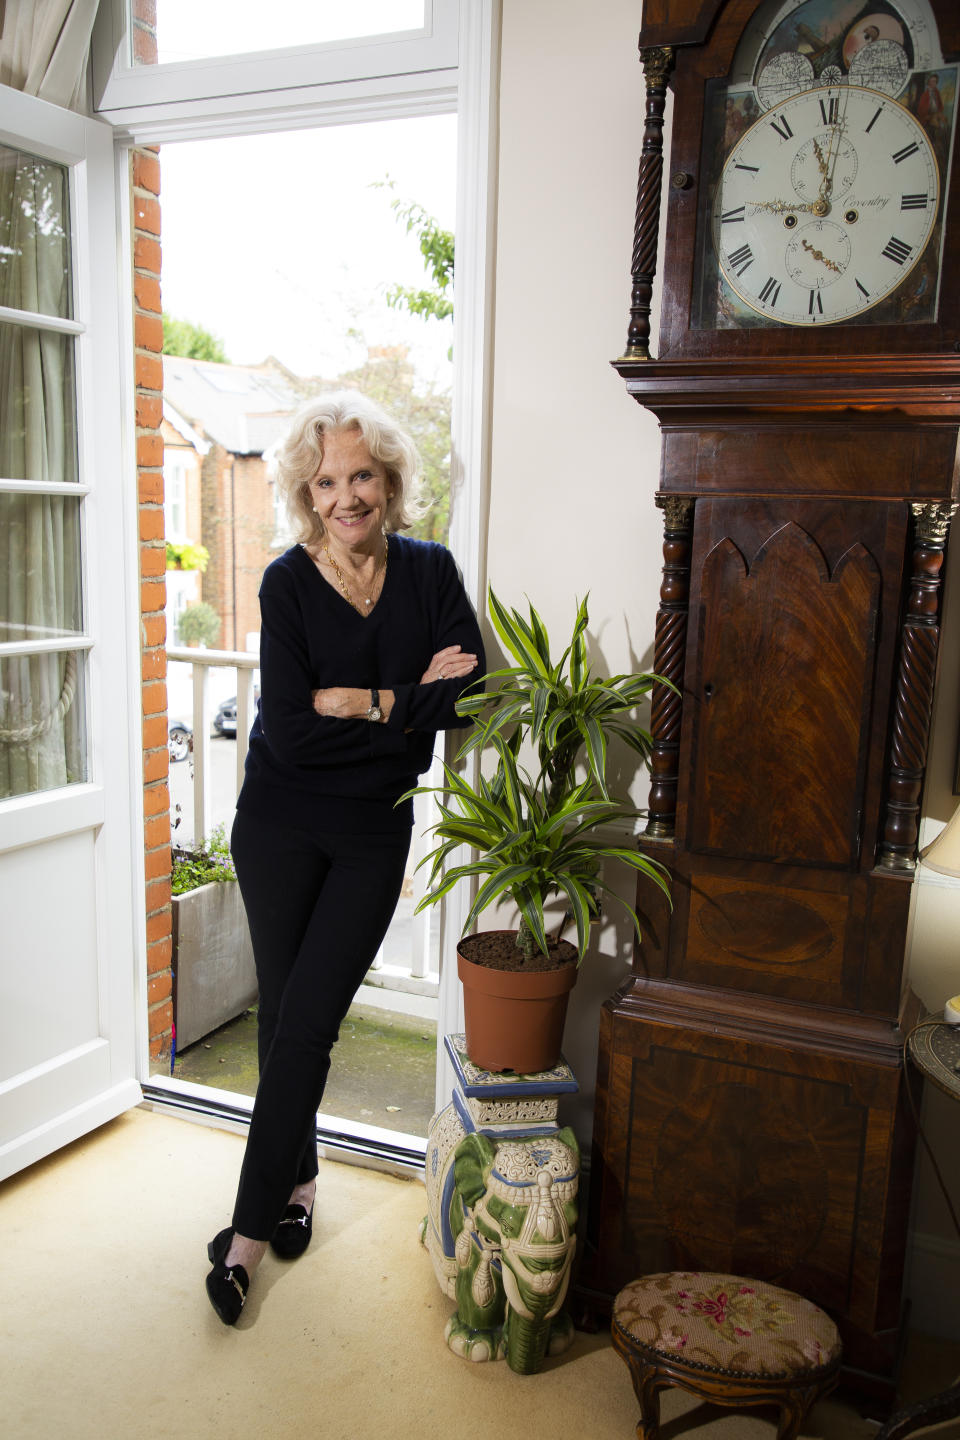 British actor Hayley Mills poses at her home in West London on Wednesday, Aug. 25, 2021 to promote her memoir "Forever Young." (Photo by Joel C Ryan/Invision/AP)